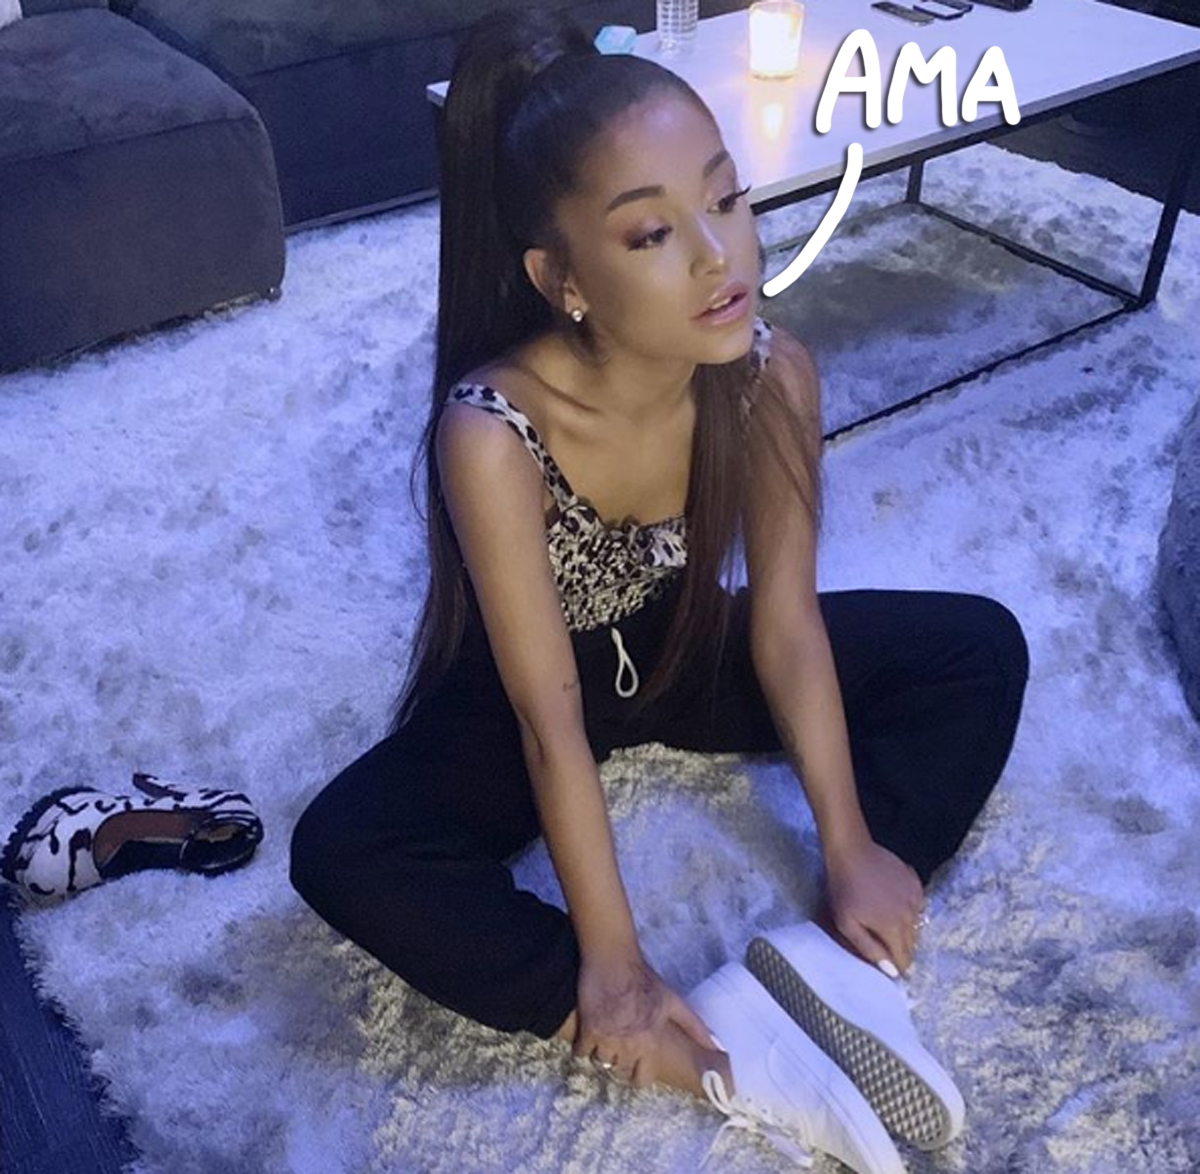 Ariana Grande is making new music to heal and that's okay